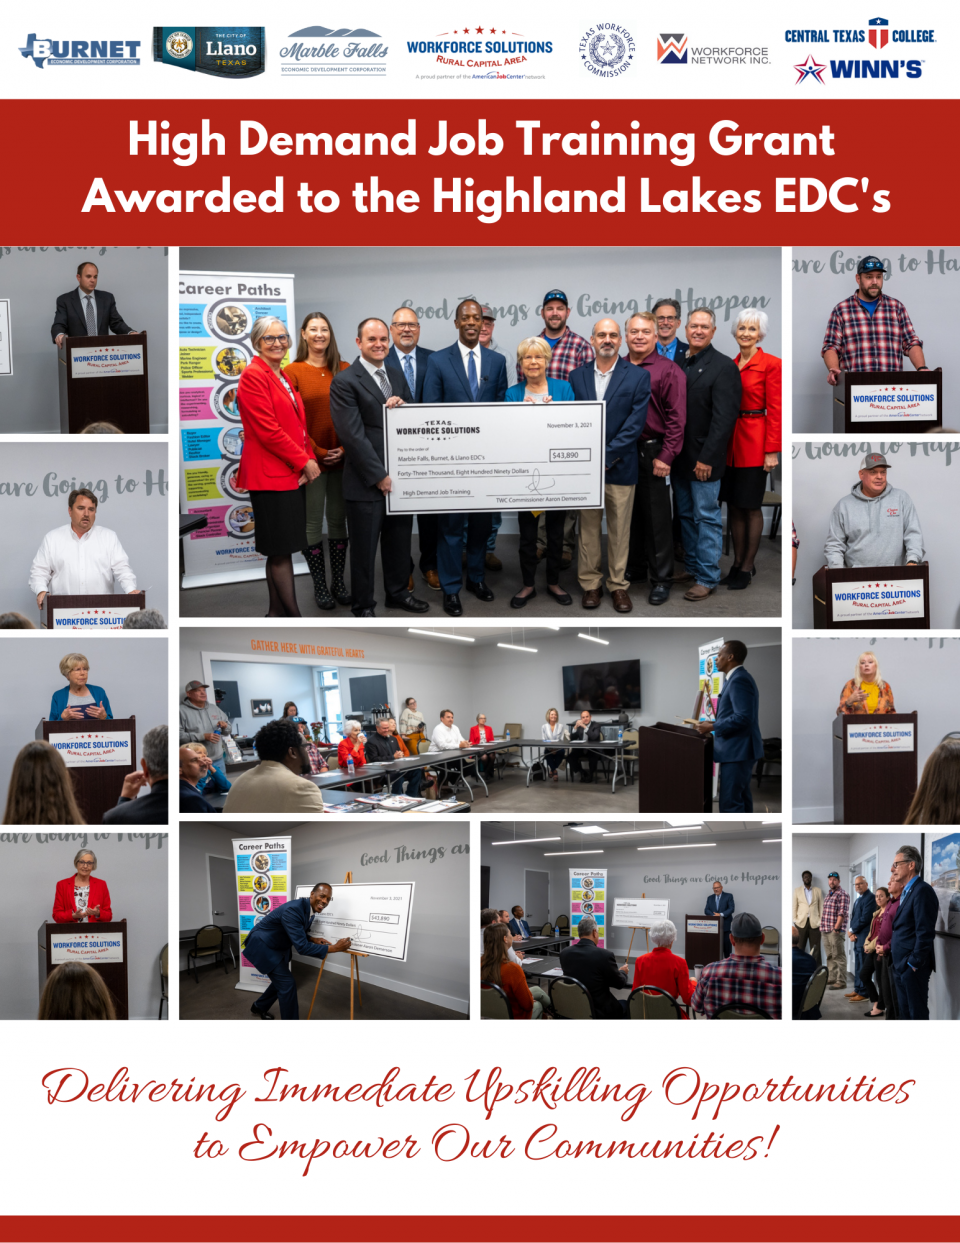 TWC Employer Commissioner Demerson Helps Present $43,890 High-Demand Job Training Grant Award to Highland Lakes EDC's